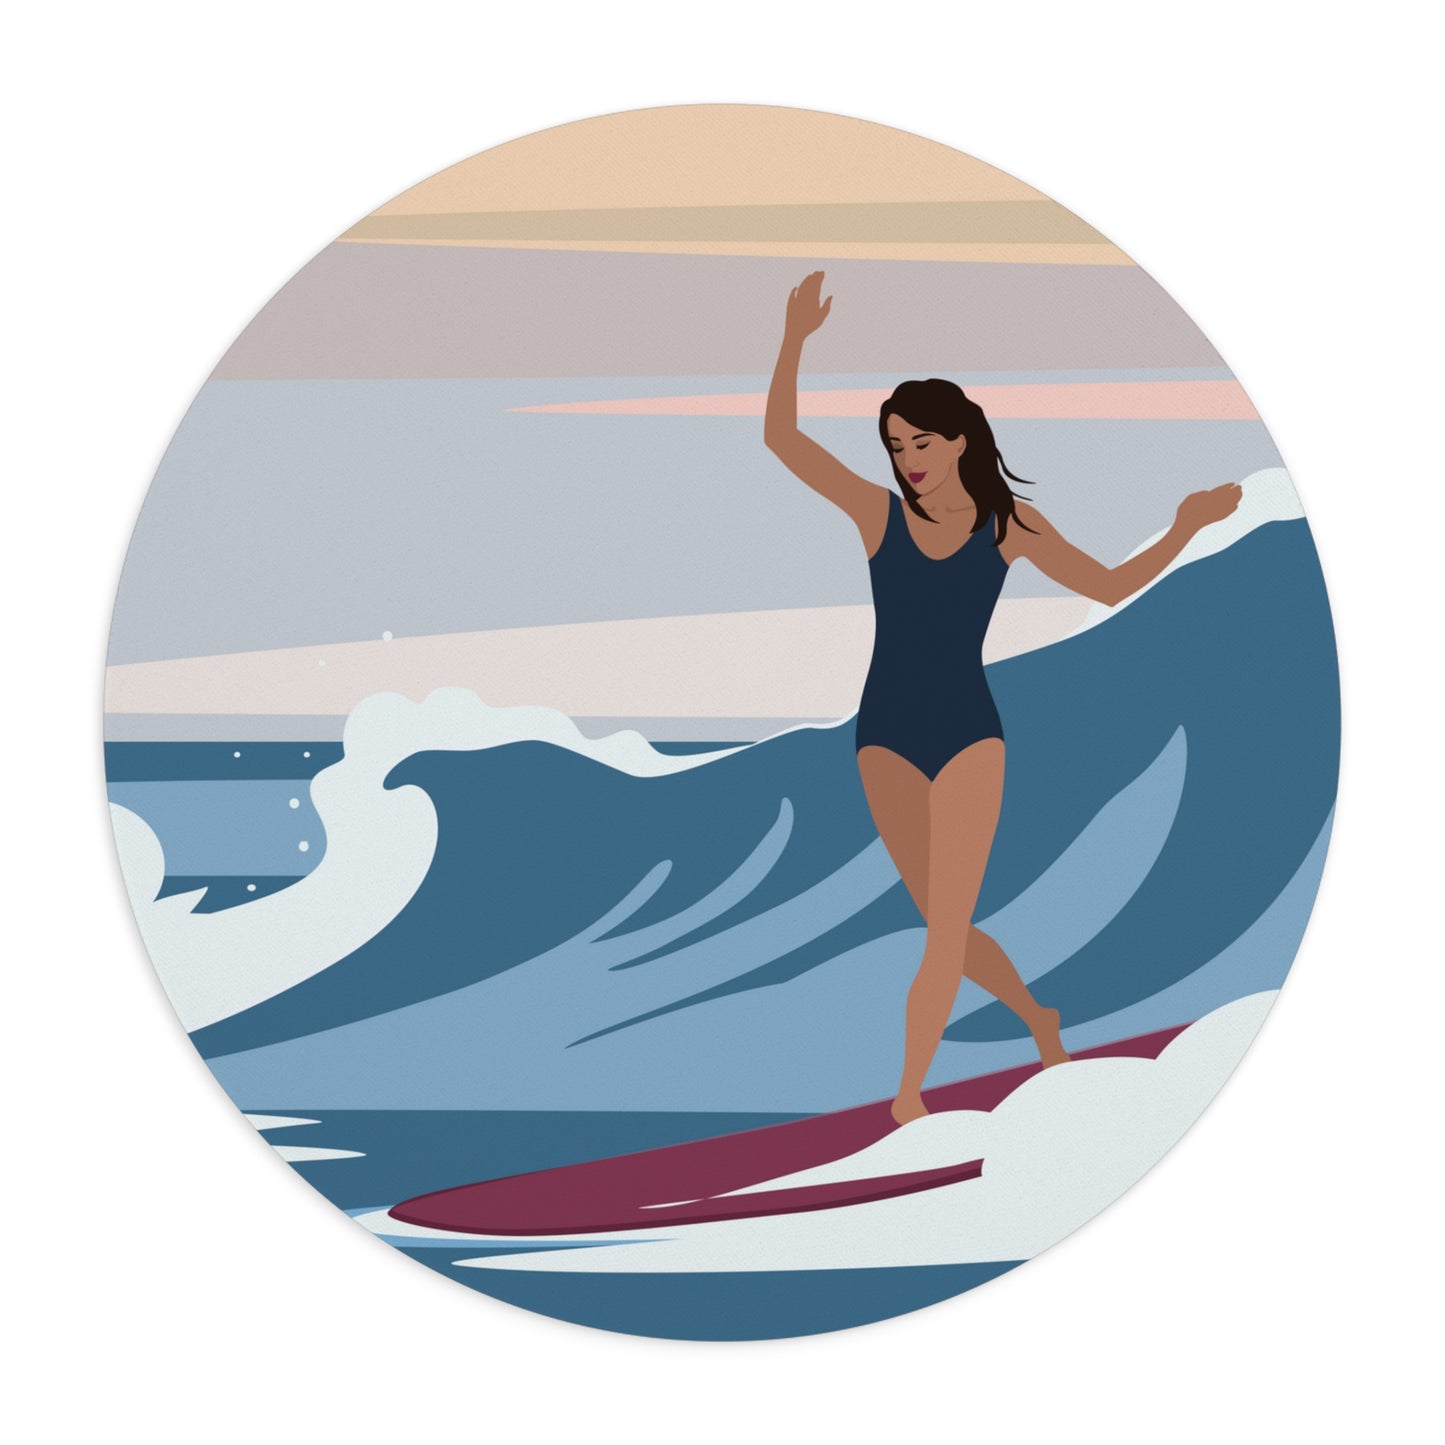 Serenity by the Sea Woman Surfing Art Non-slip Creative Design Mouse Pad